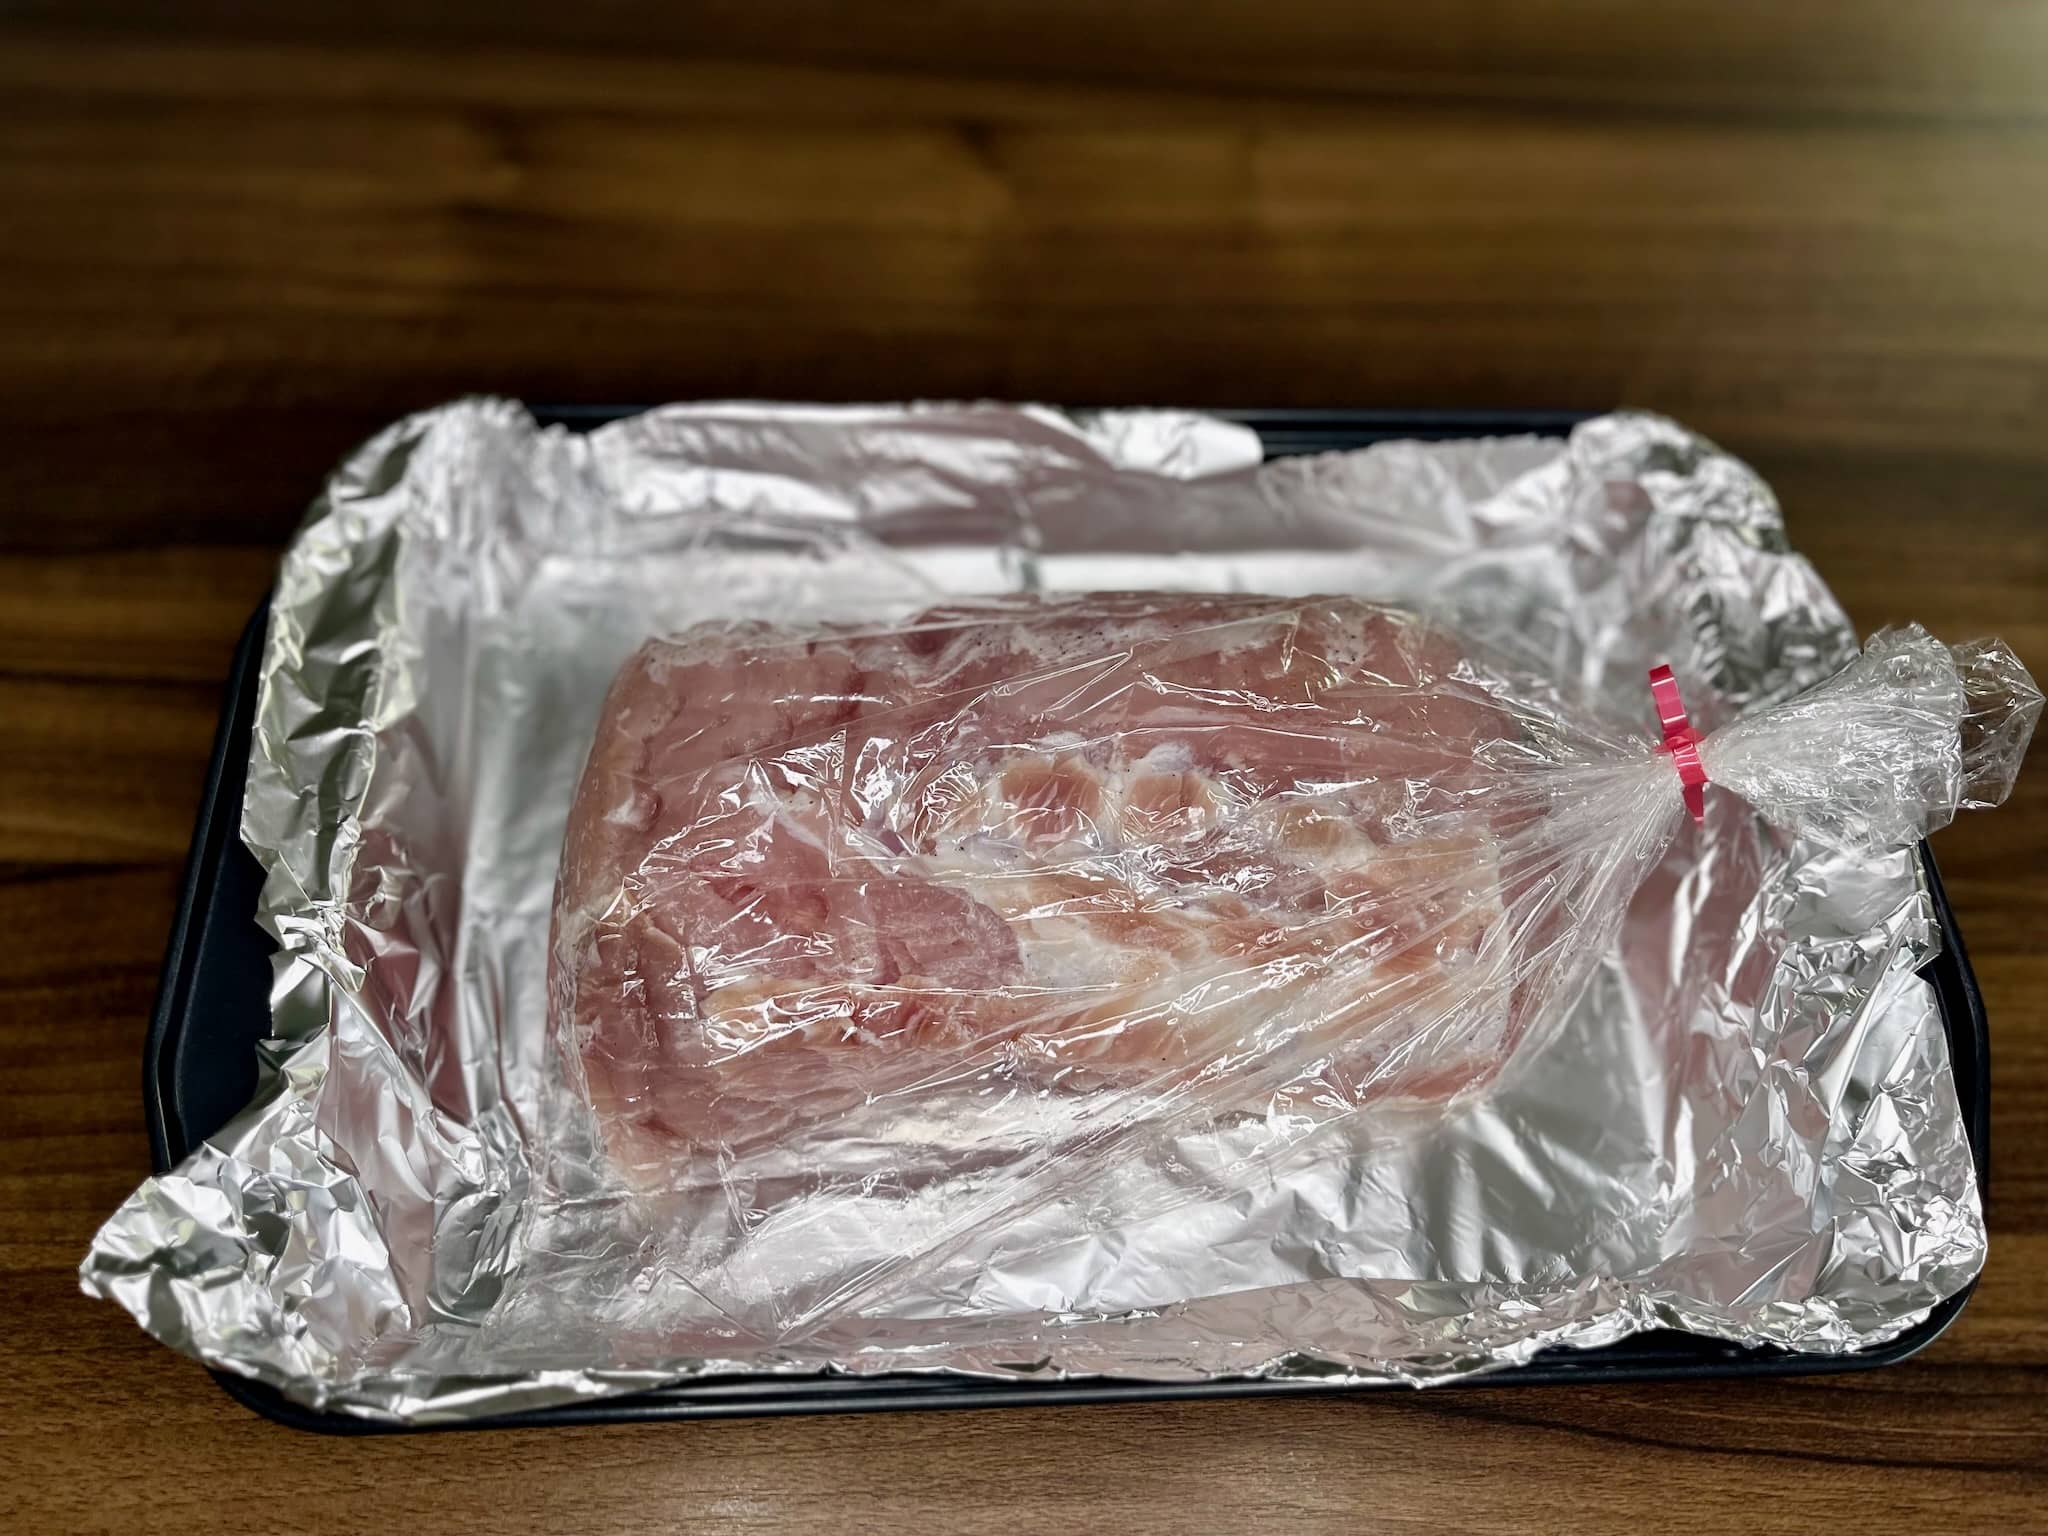 Marinated pork loin in a roasting bag on a lined with aluminium foil baking tray